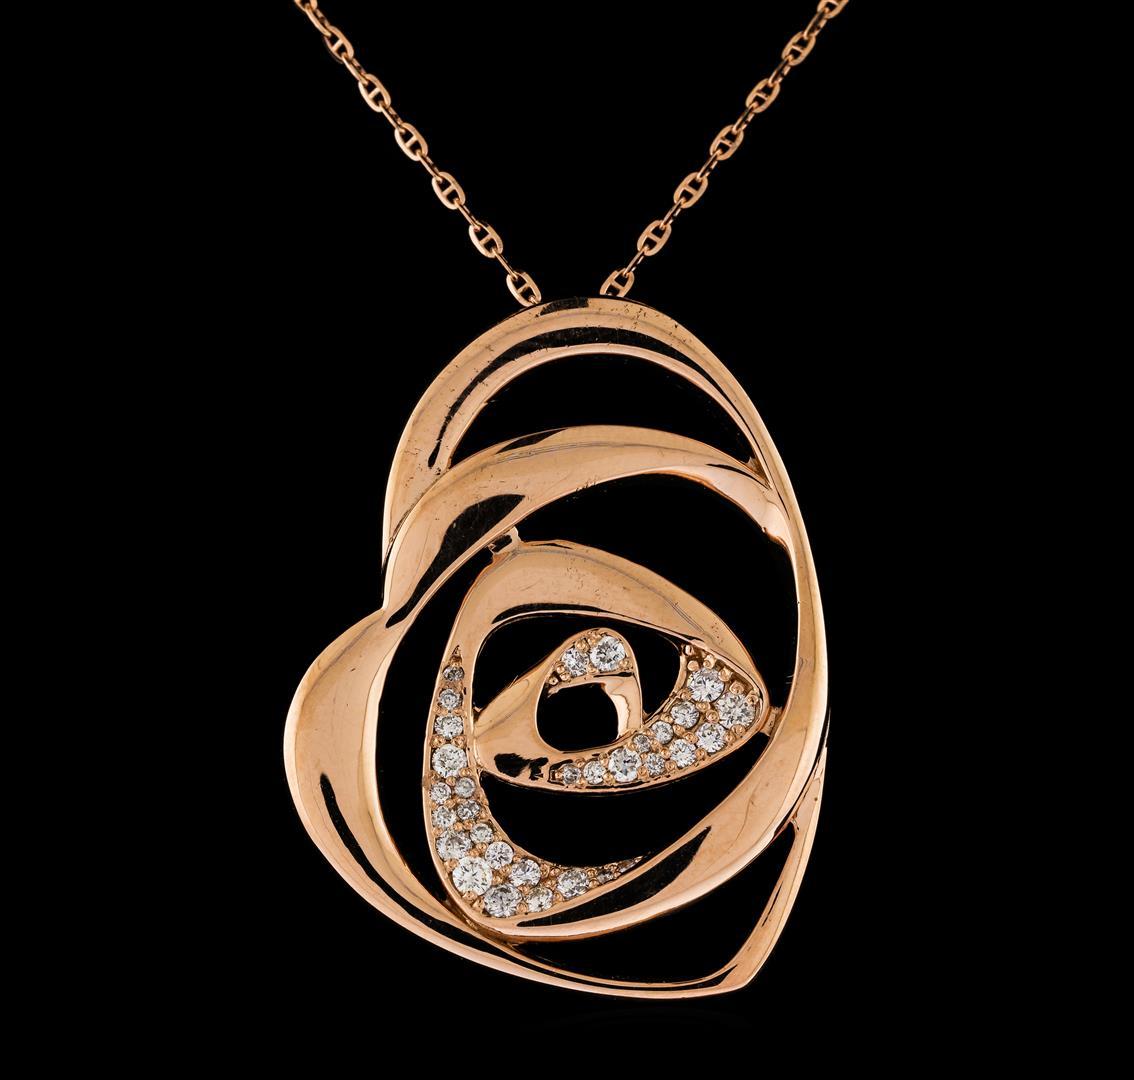 0.50 ctw Diamond Pendant With Chain - 14KT Rose Gold